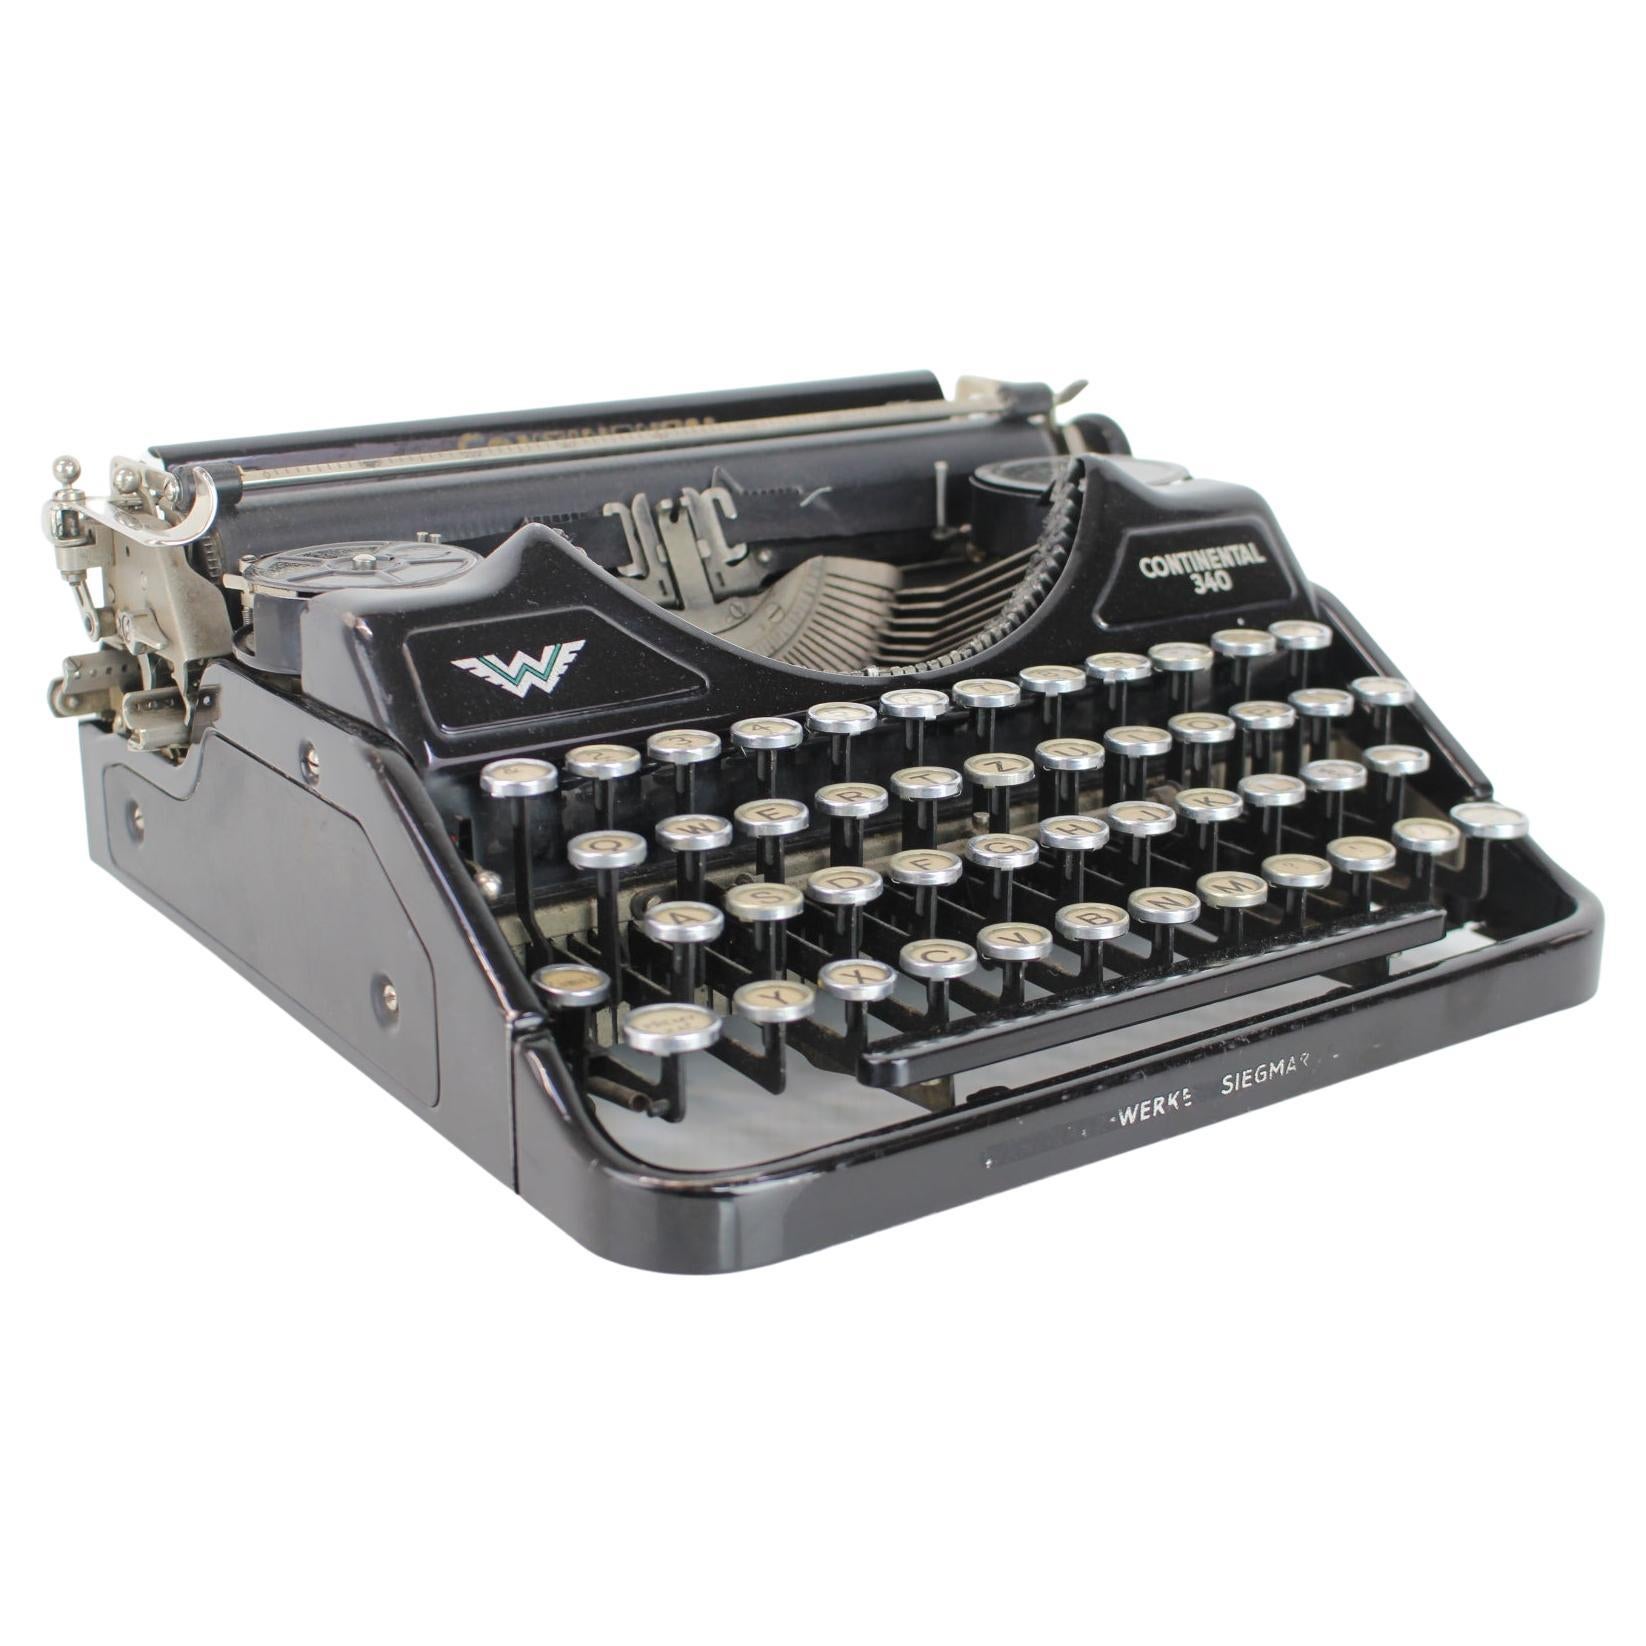 Portable Typewriter Continental 340, Germany 1937